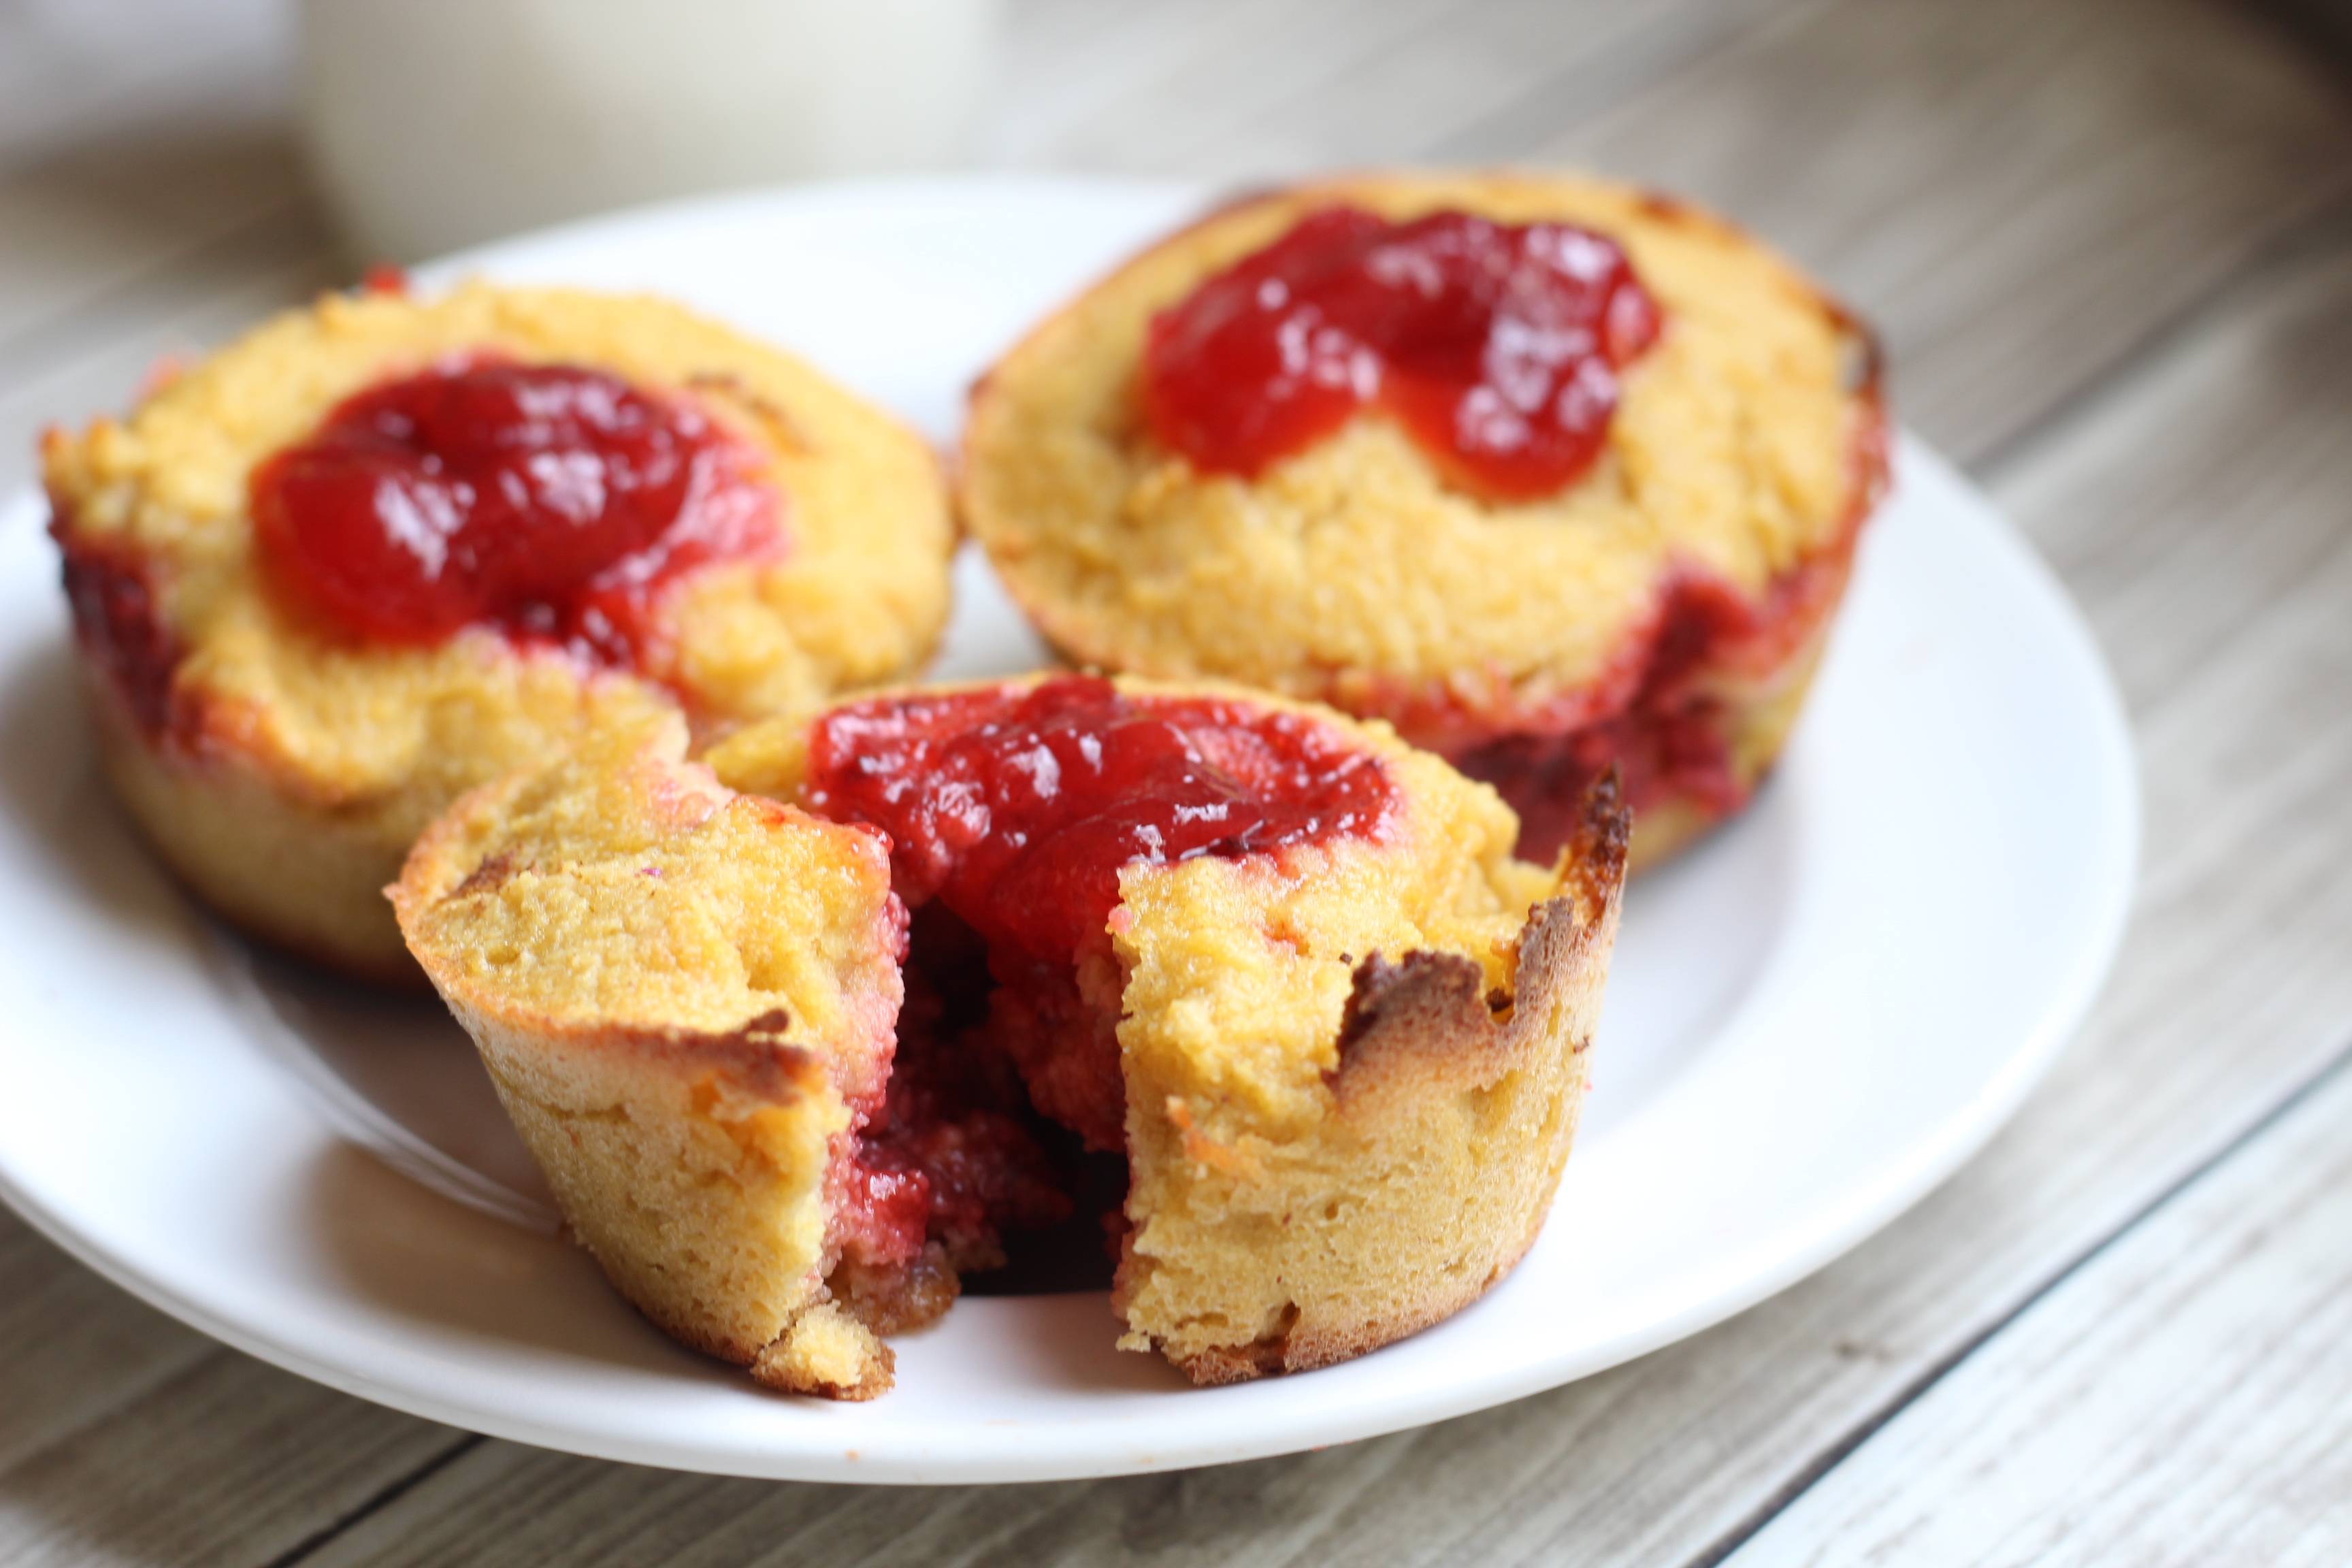 Looking for a low carb muffin recipe that the kids will love? These keto approved PB&J Muffins are so good that they can be eaten for breakfast or as a treat.